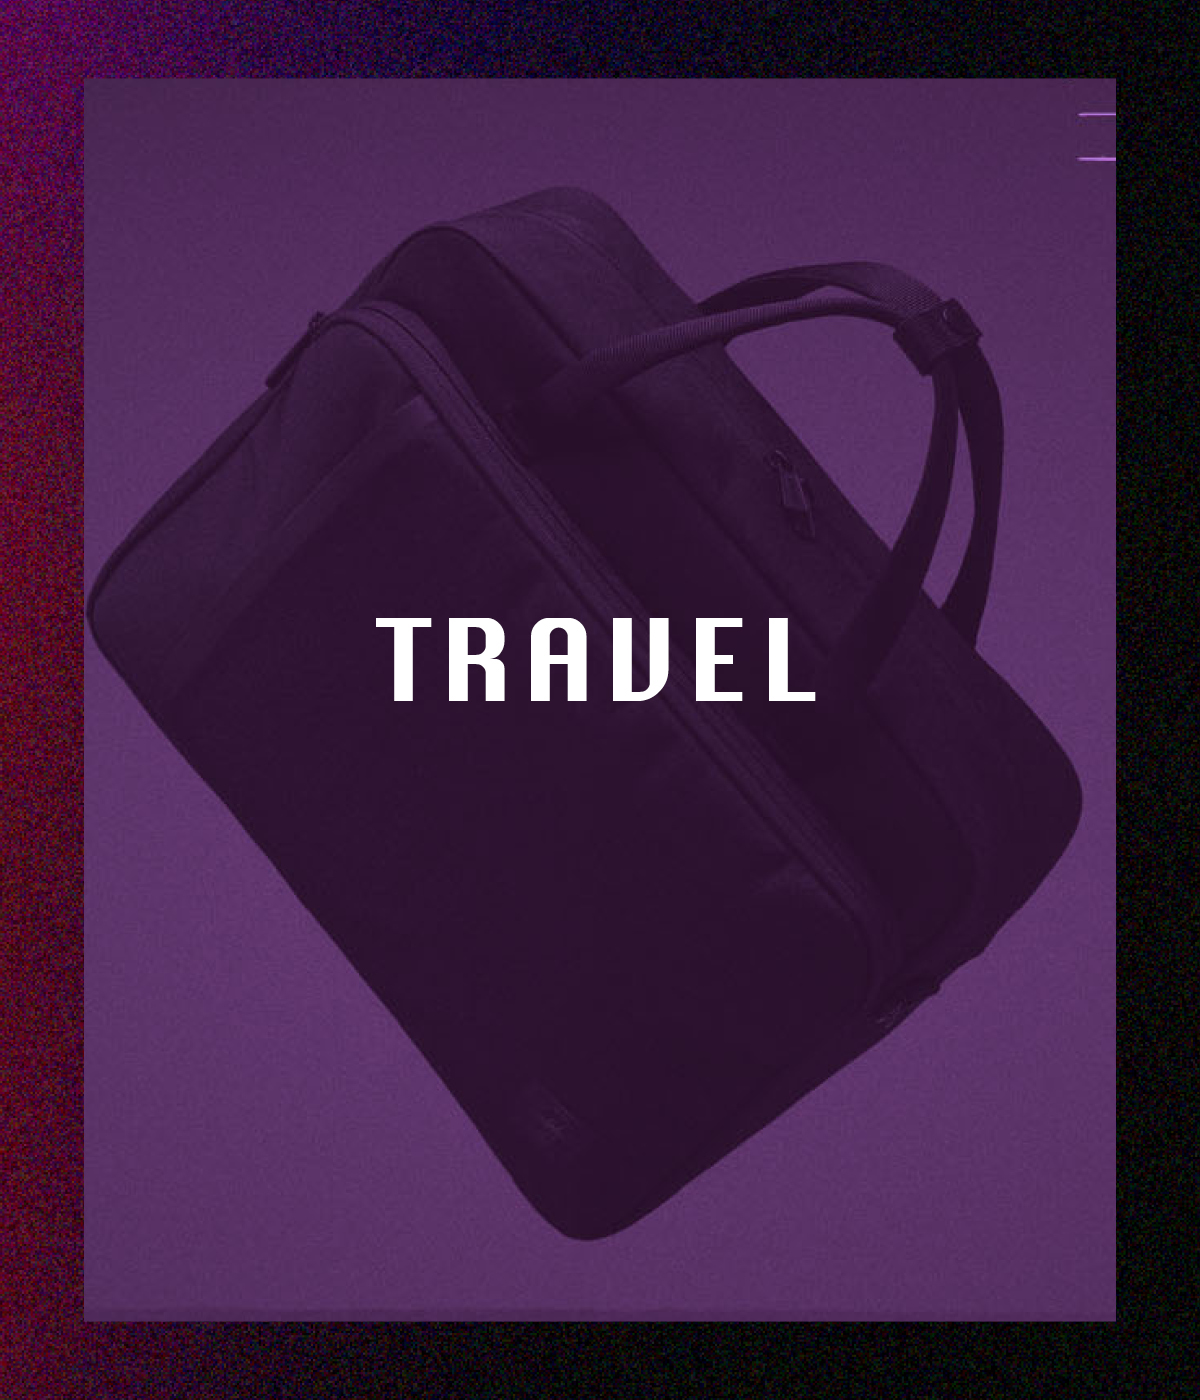 Sale Travel Bags